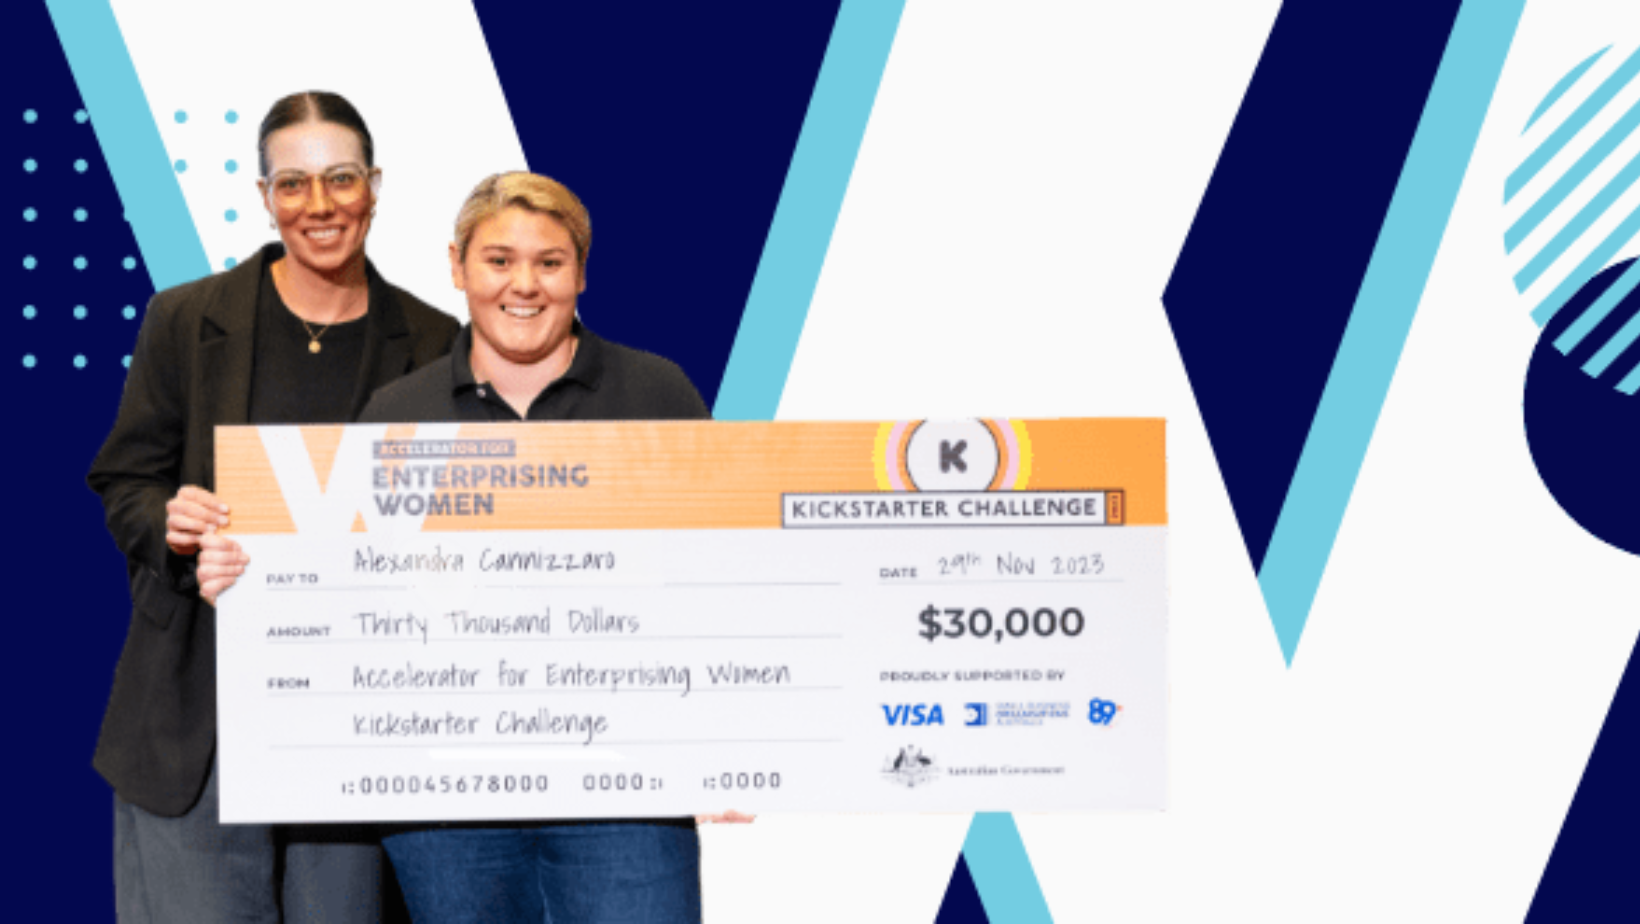 Two individuals smile while holding a large presentation check. The check reads "Enterprising Women Kickstarter Challenge," is dated November 29th, 2023, for the amount of $30,000, and is made out to Alessandra Cavacece. Celebrating women in business, the background features a blue and white pattern.